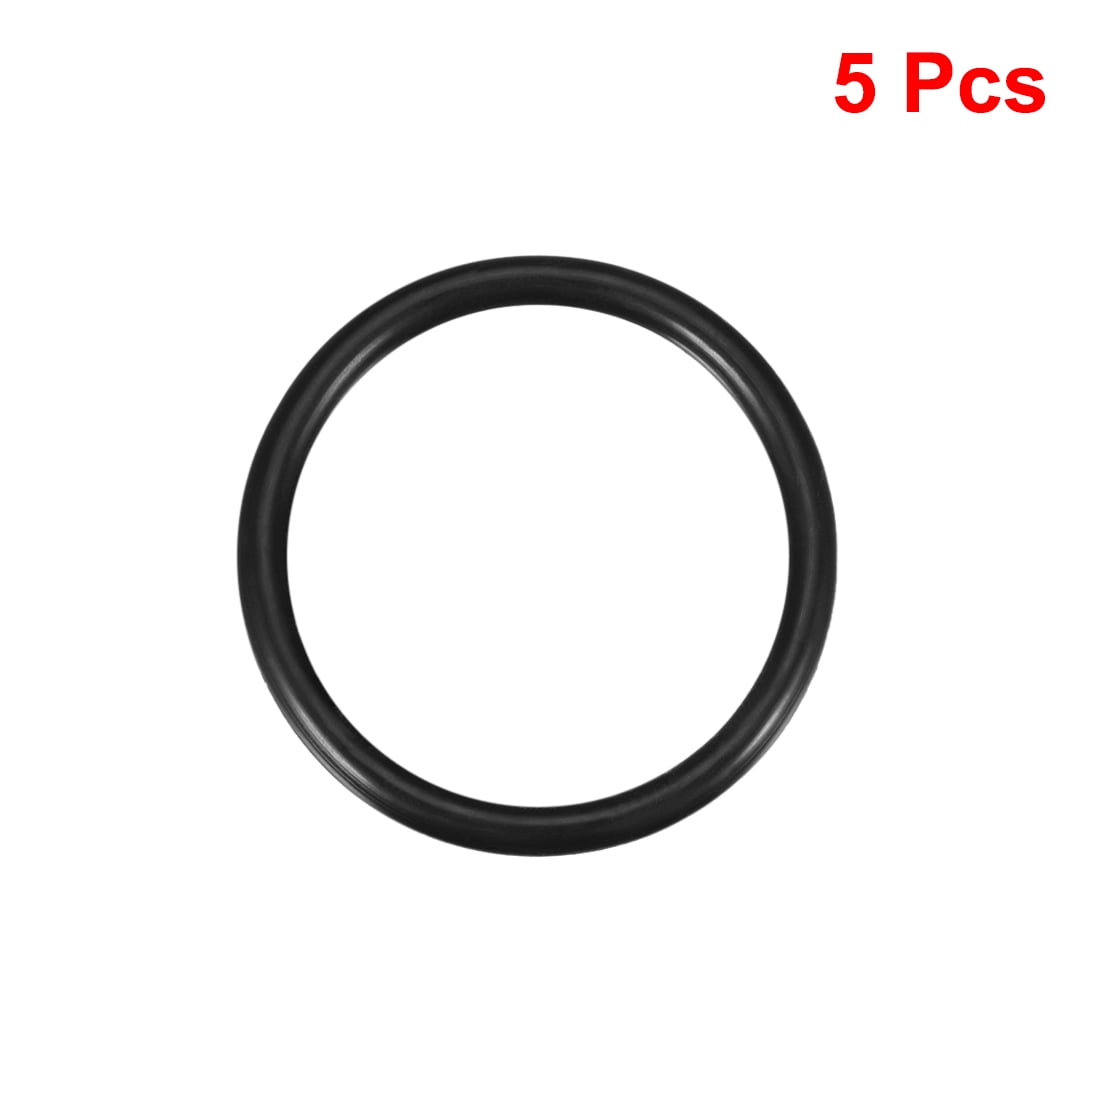 4mm Section 180mm Bore NITRILE 70 Rubber O-Rings 